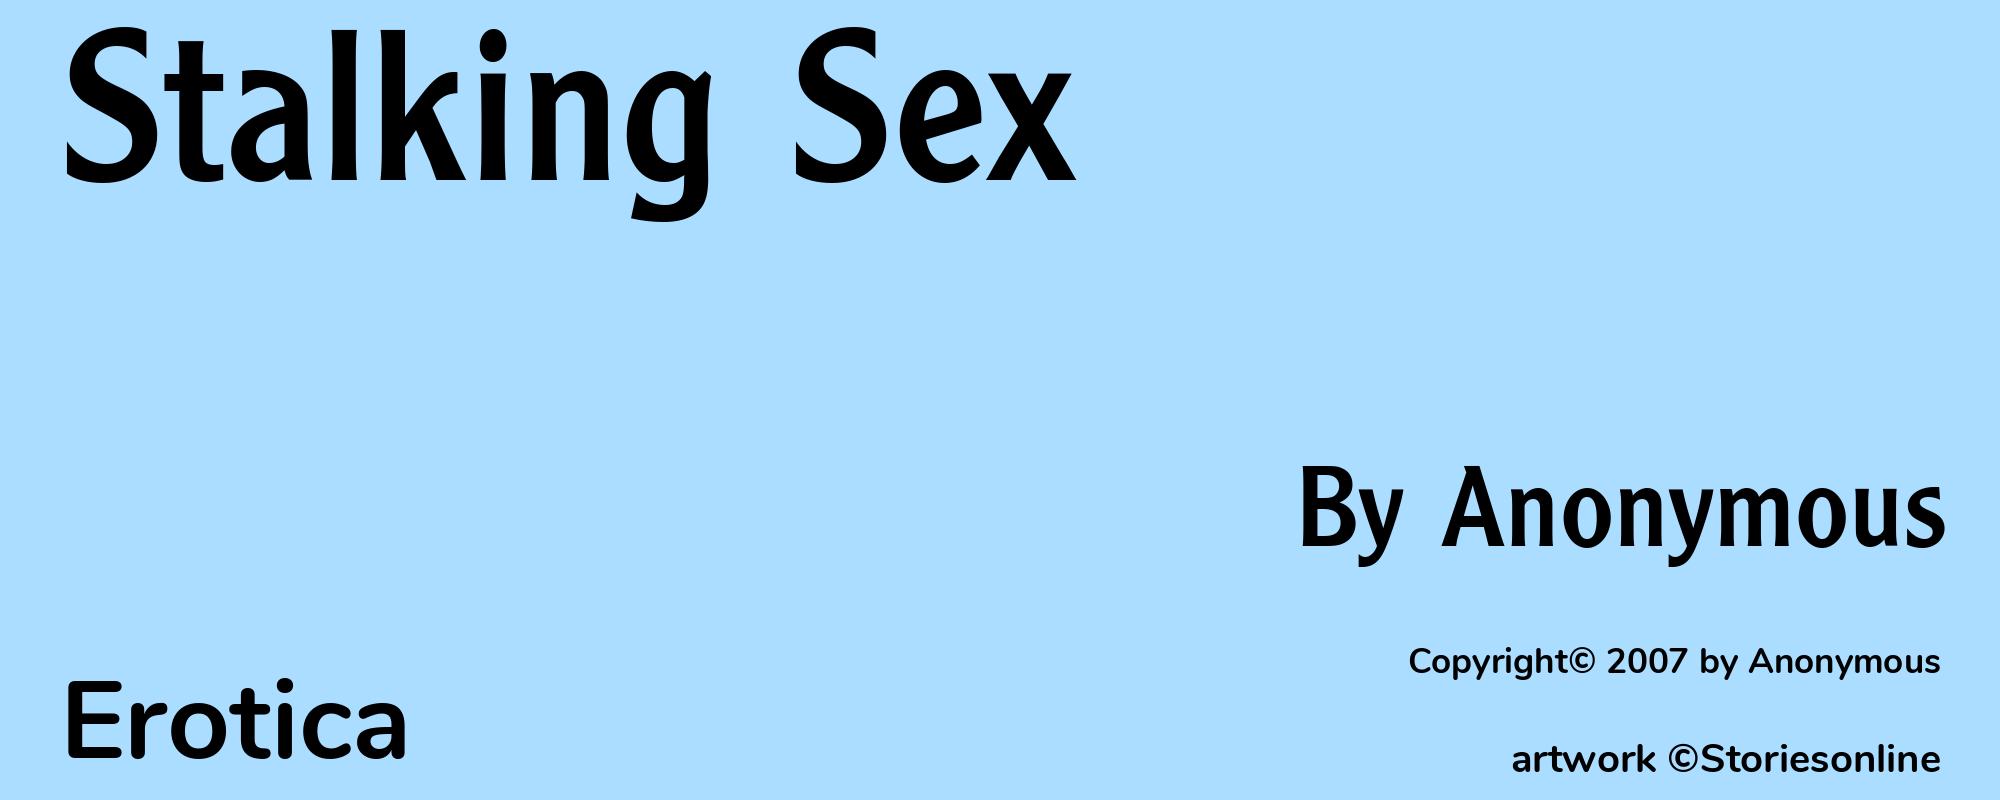 Stalking Sex - Cover